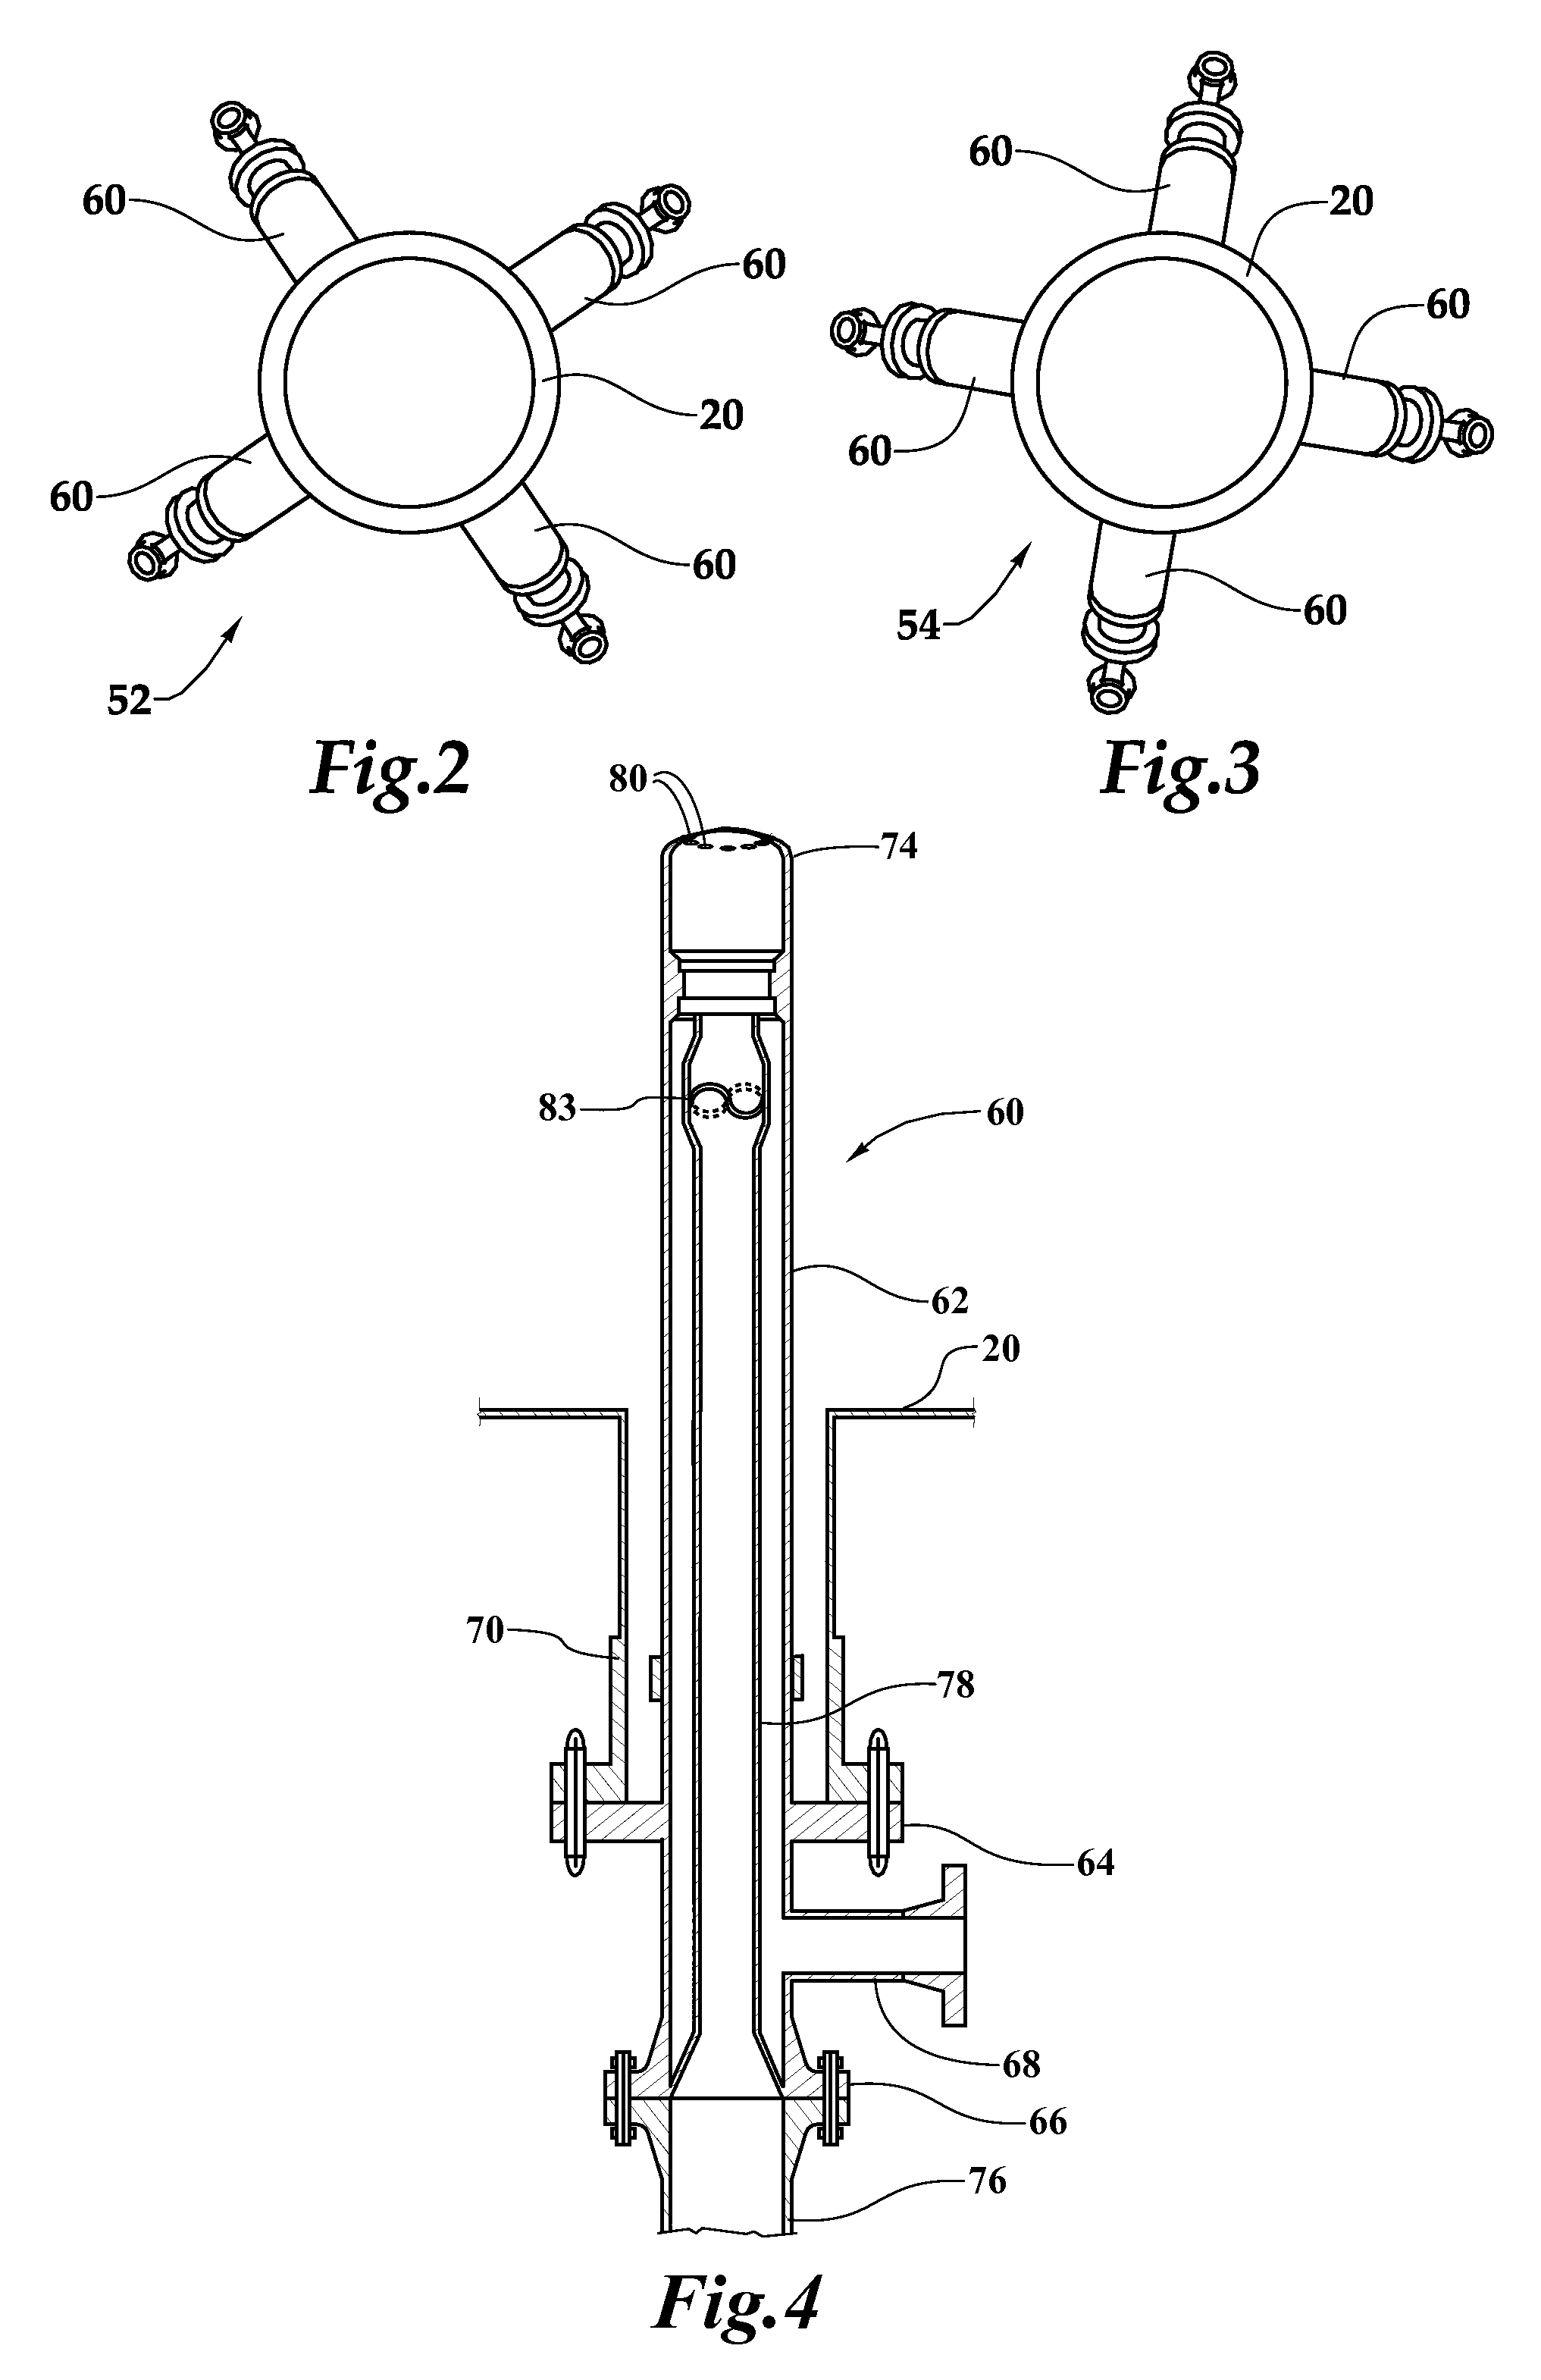 Fcc dual elevation riser feed distributors for gasoline and light olefin modes of operation